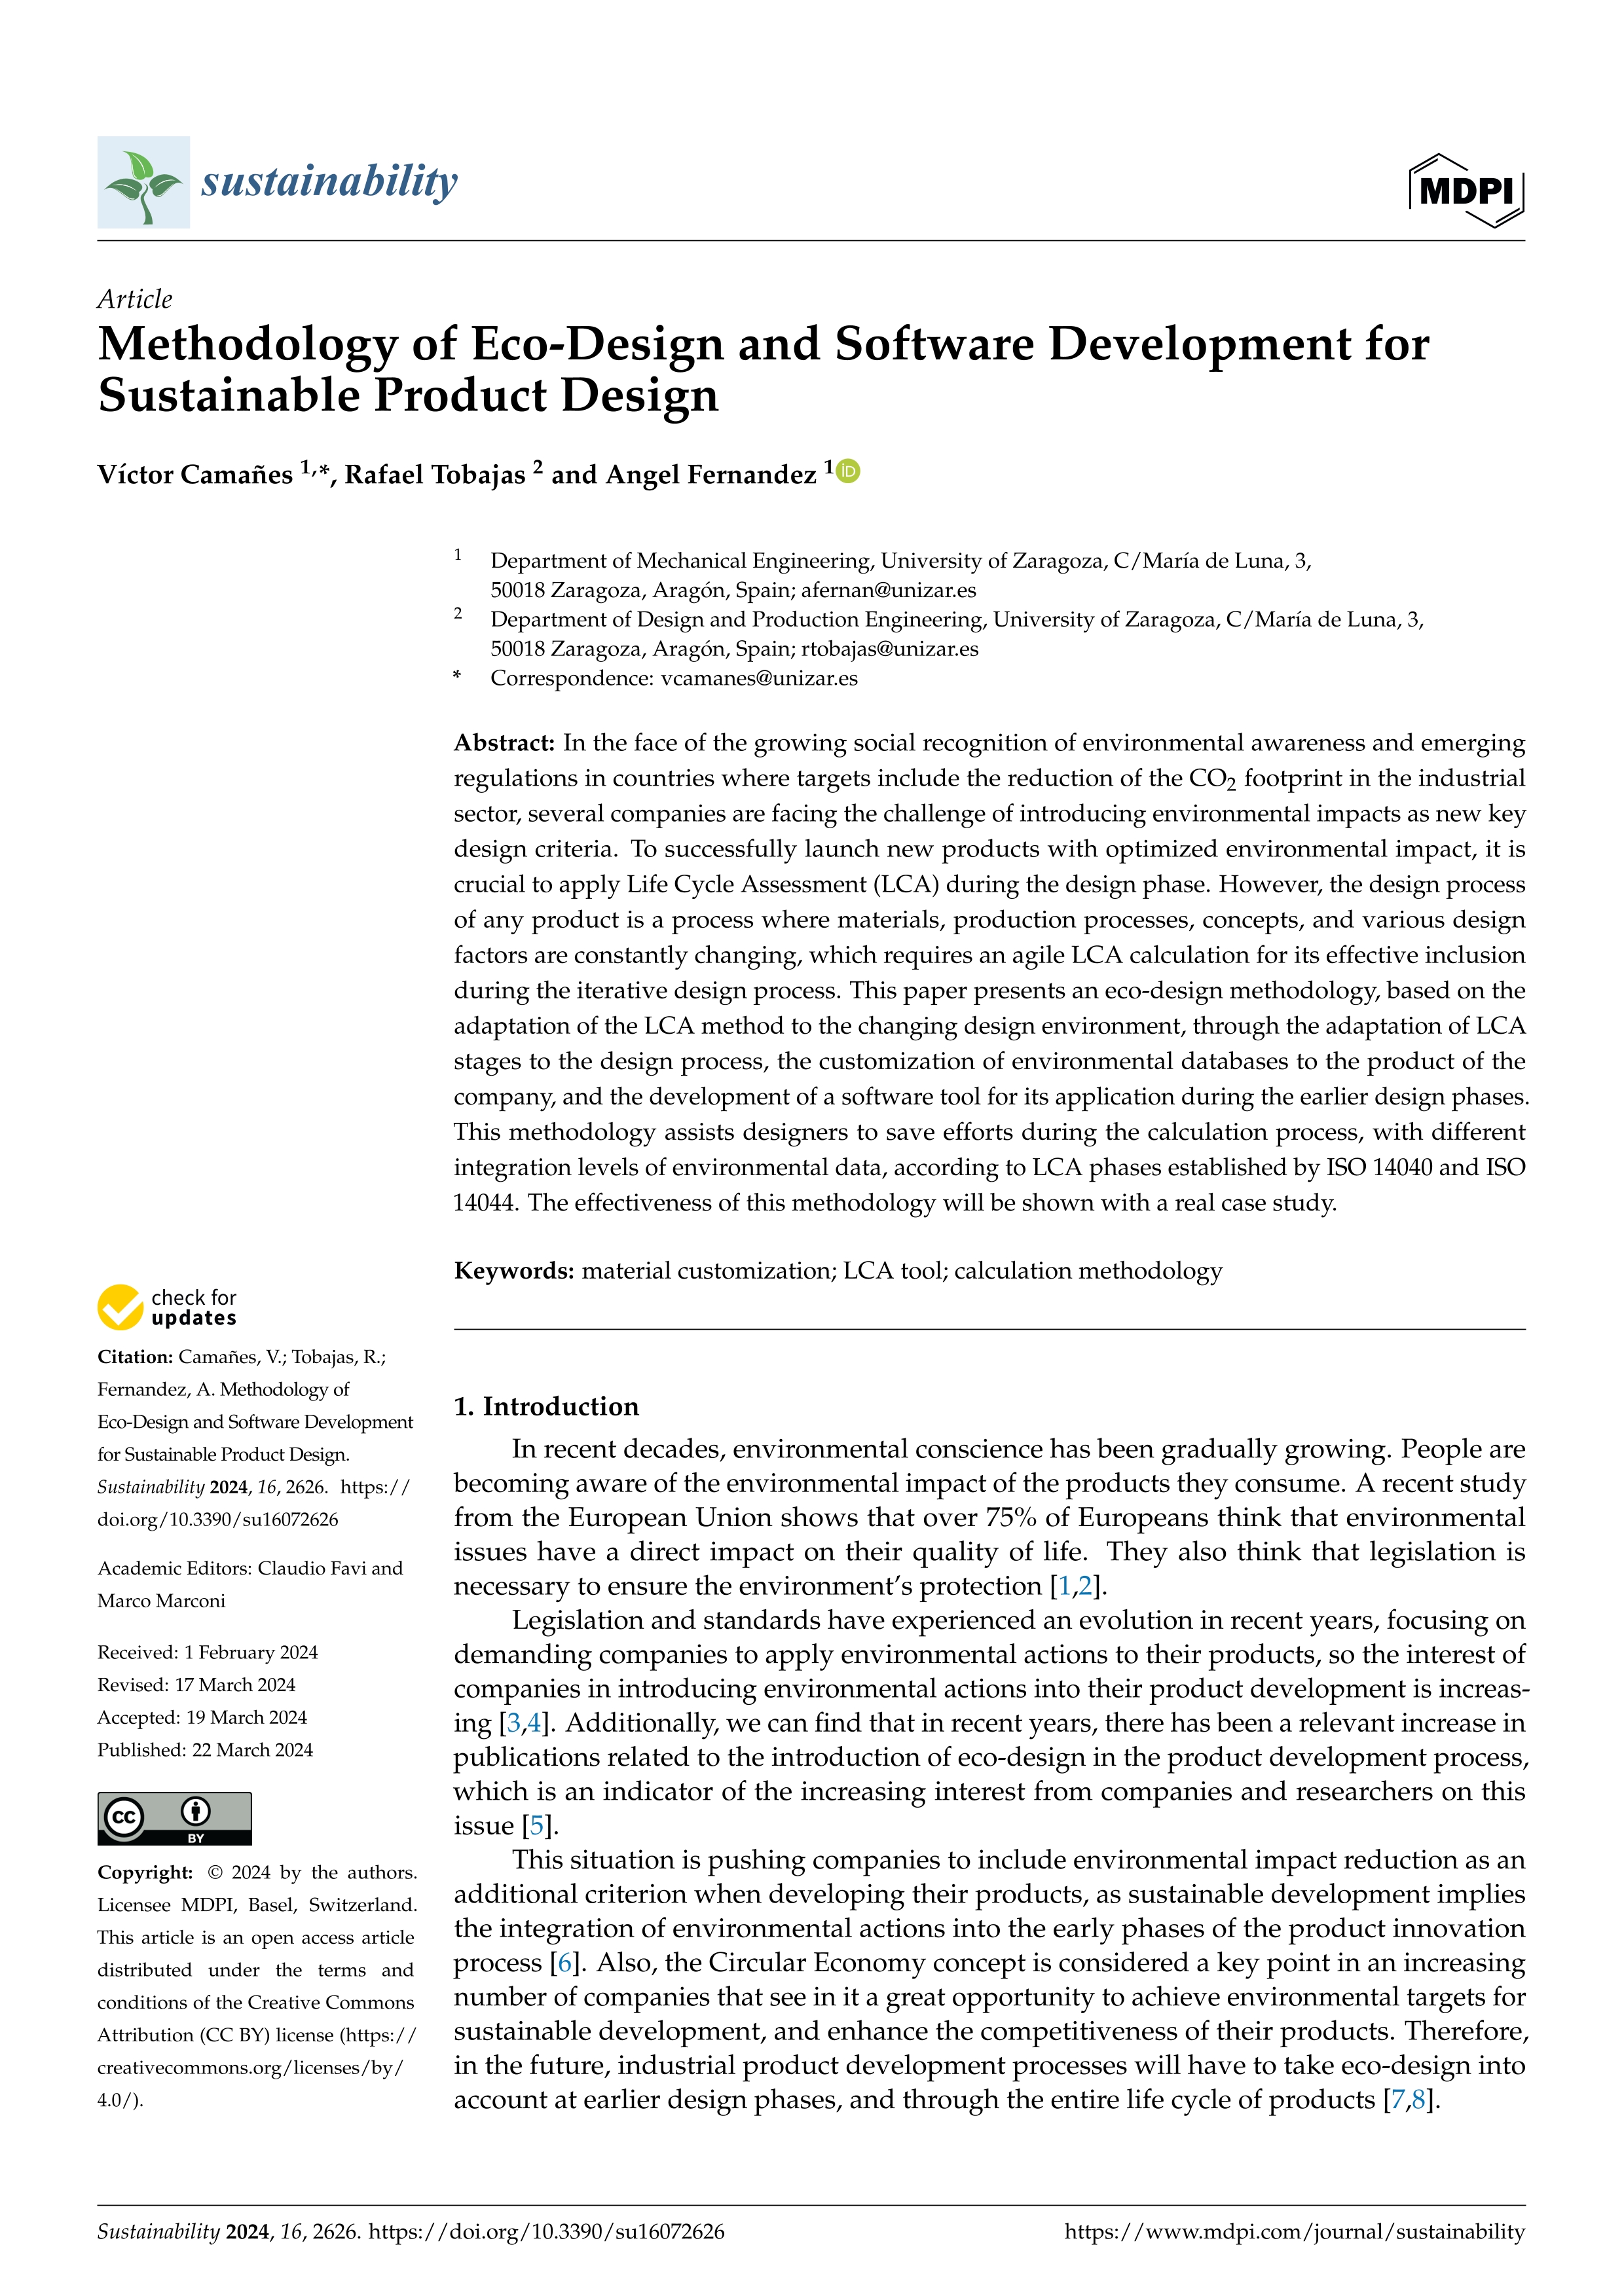 Methodology of Eco-Design and Software Development for Sustainable Product Design